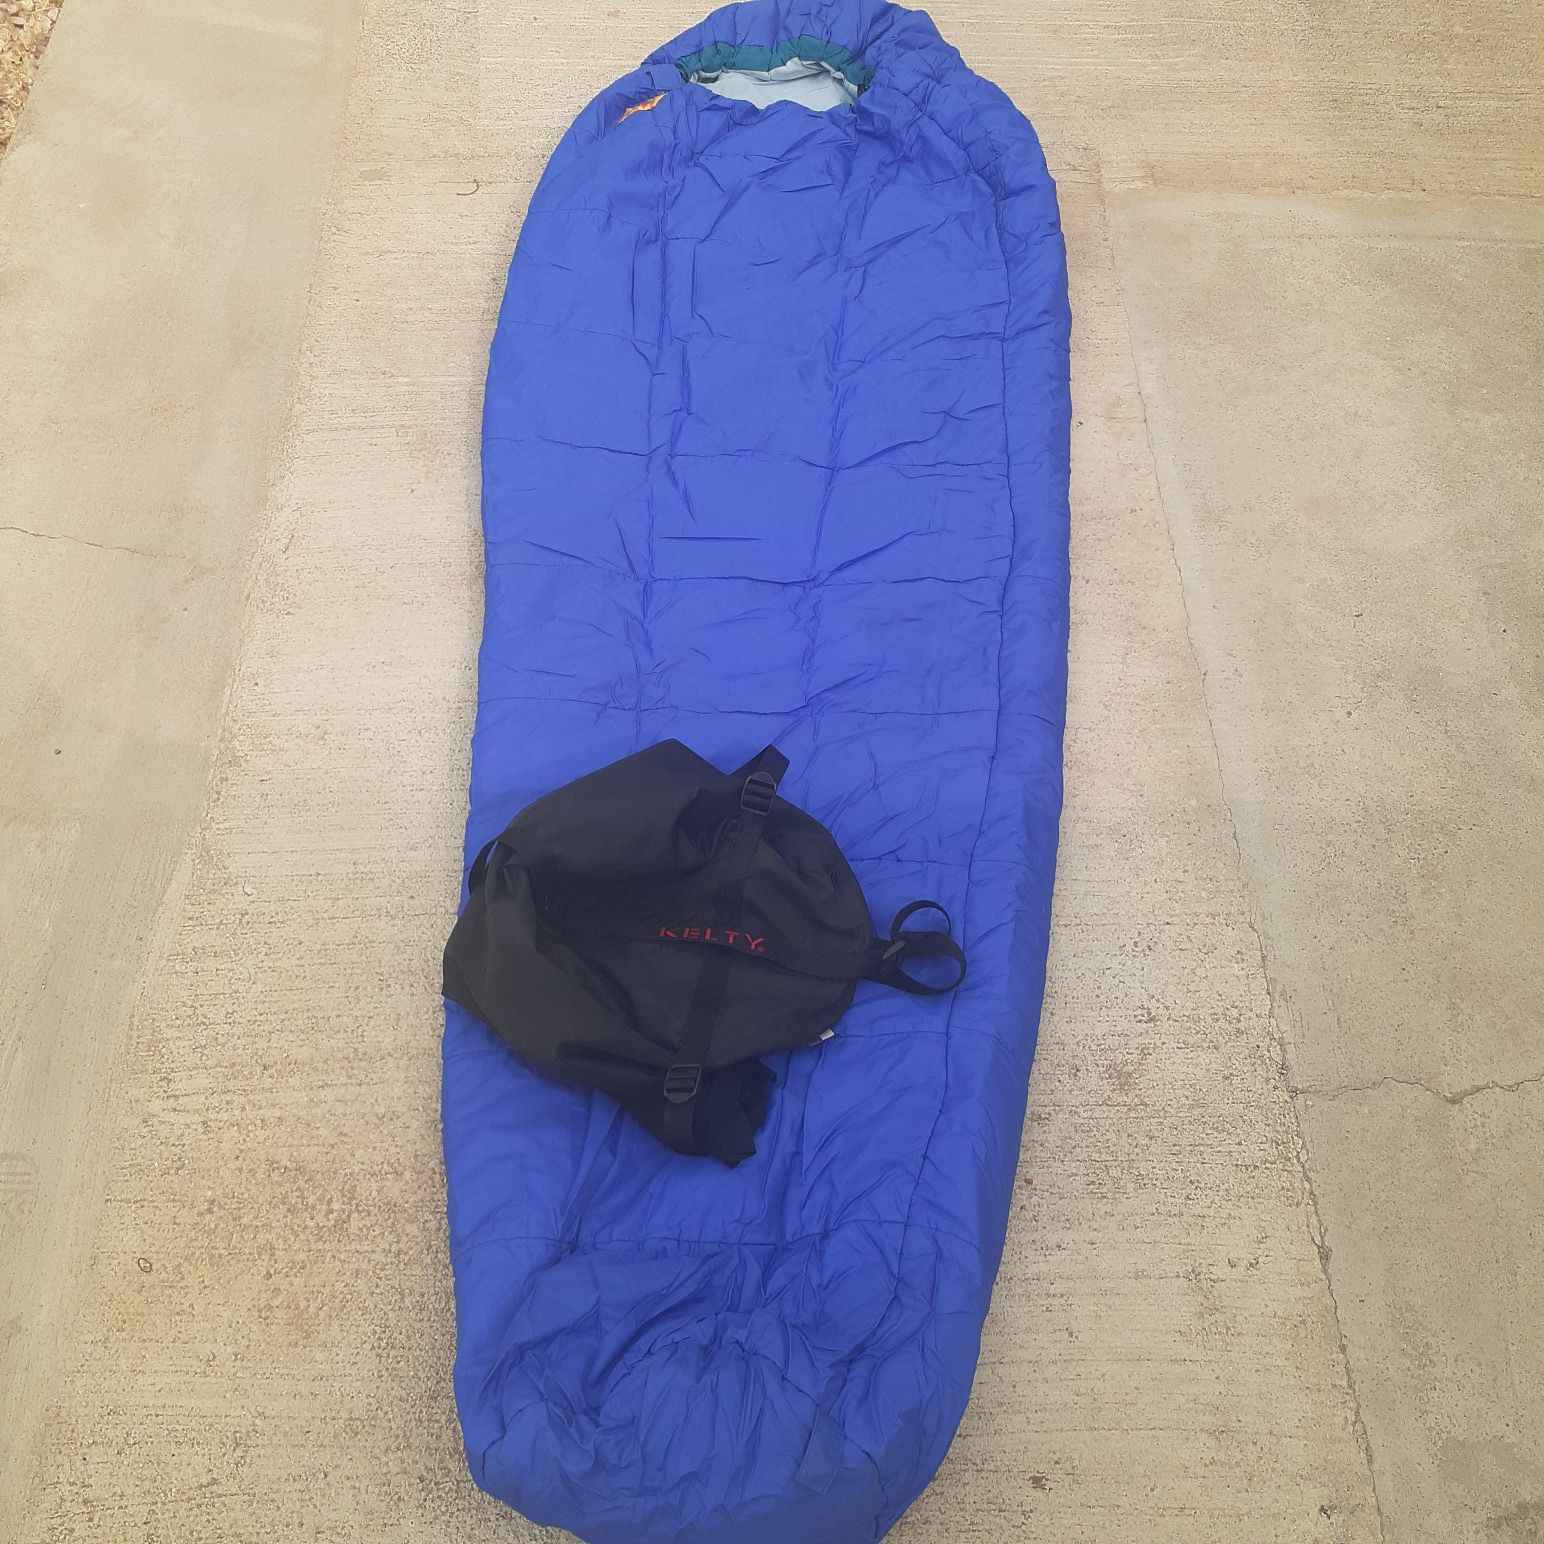 Kelty Sawtooth 20 Degree Right Mummy Sleeping Bag Polarguard 32" by 84" 48 ounces blue no rips or tears zipper good camping hiking beach